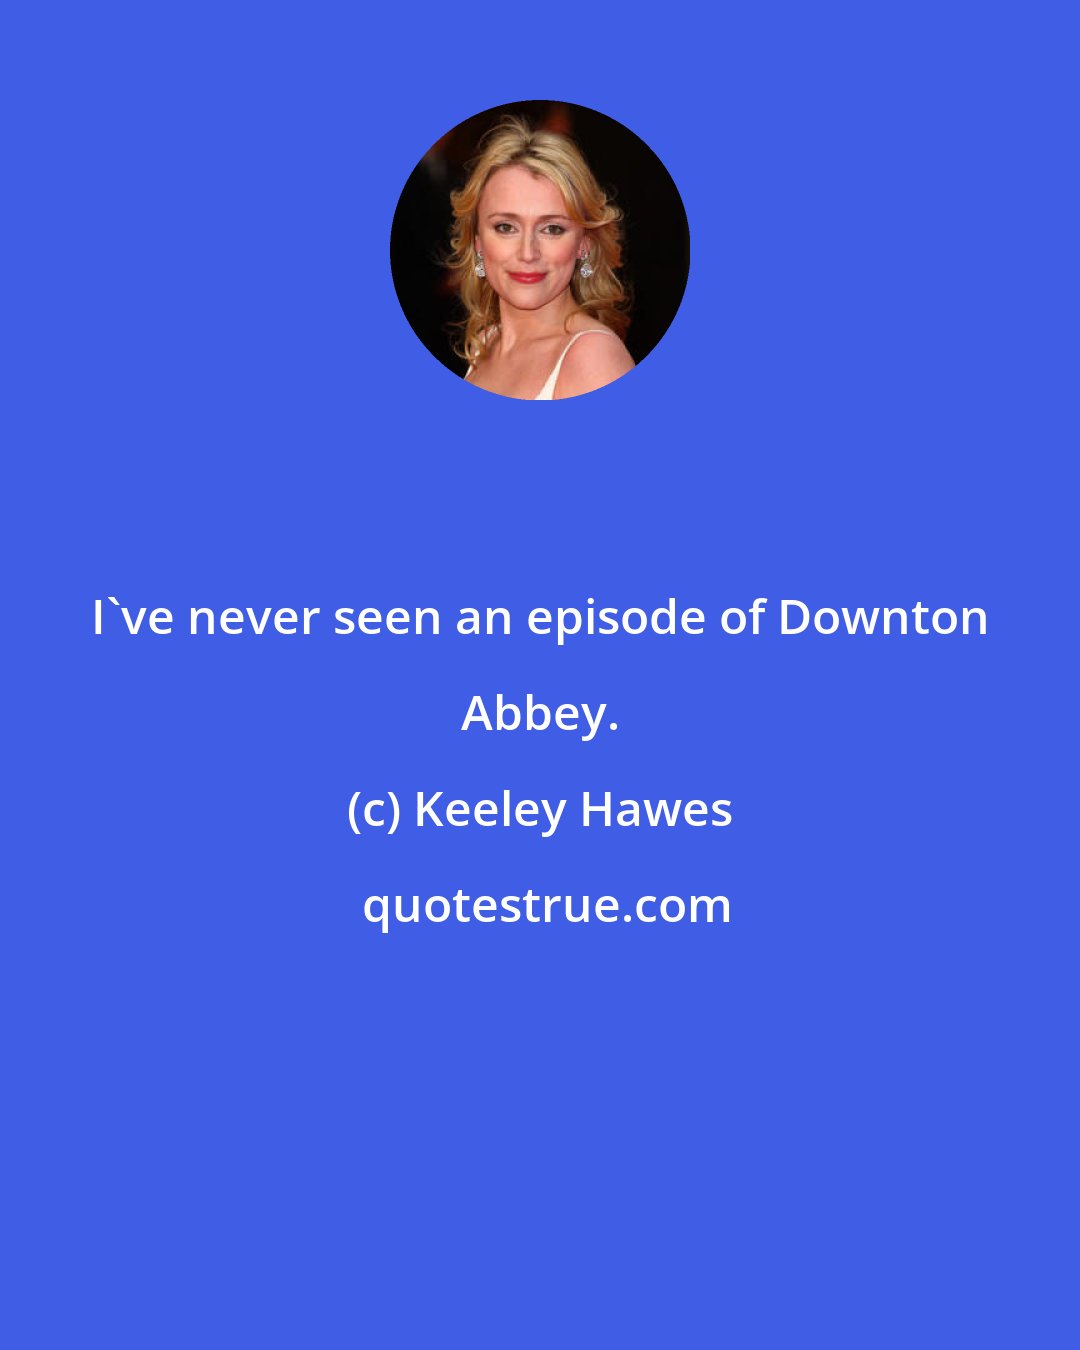 Keeley Hawes: I've never seen an episode of Downton Abbey.